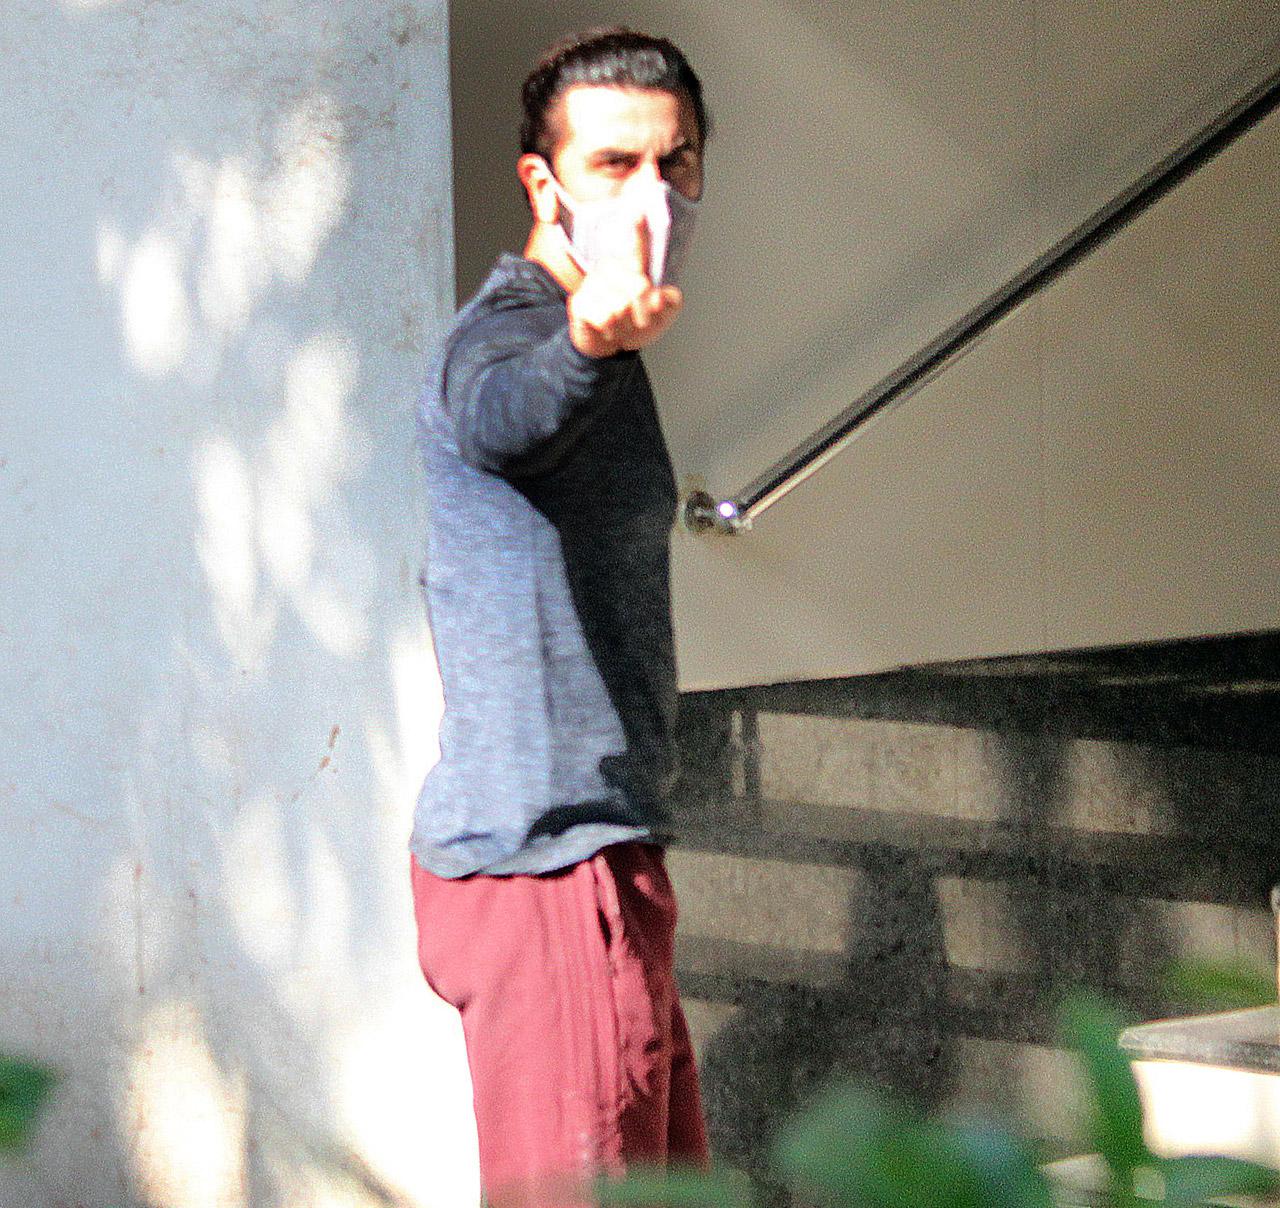 Ranbir Kapoor, who recently recovered from COVID-19, was clicked outside a clinic in Bandra.